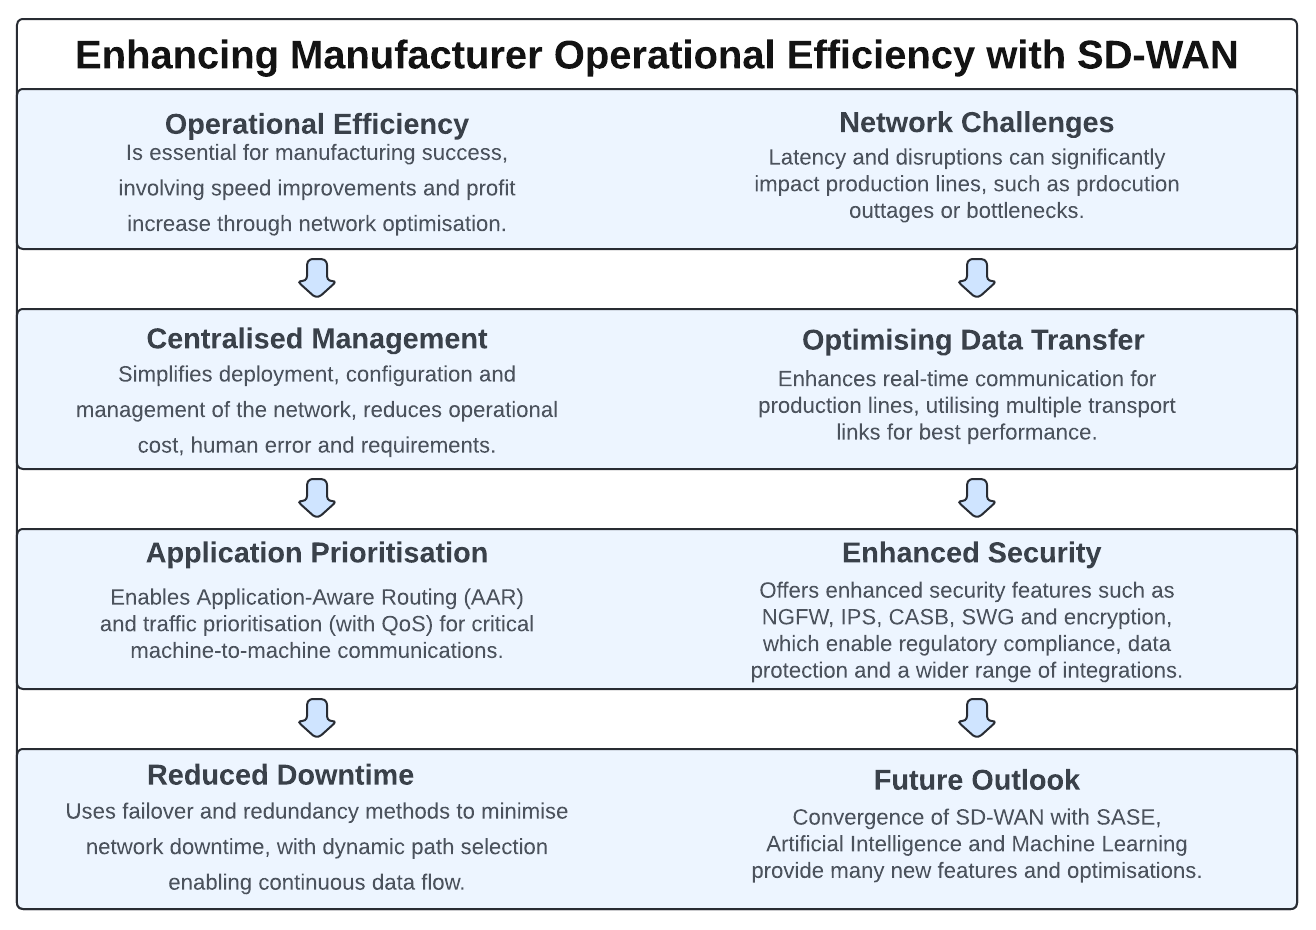 Enhancing Operational Efficiency with SD-WAN in Manufacturing